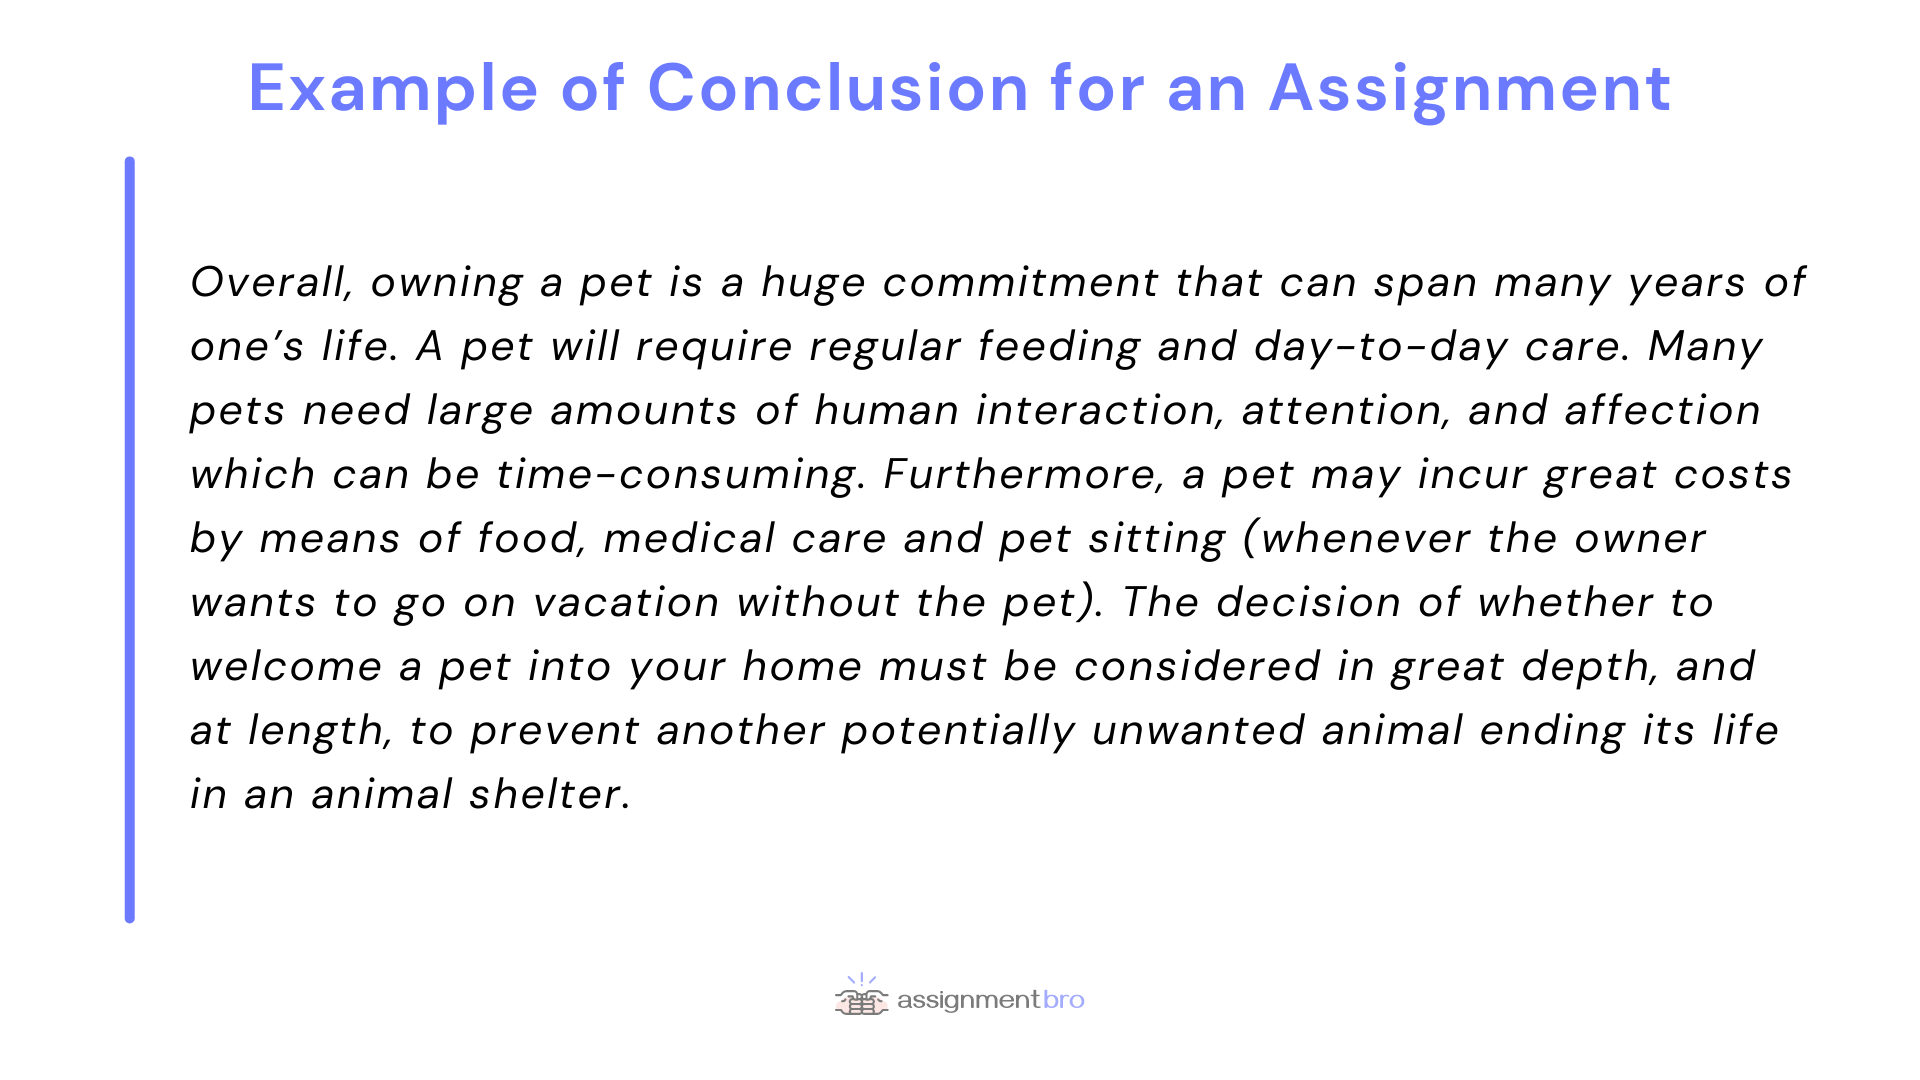 Conclusion Example for an Assignment